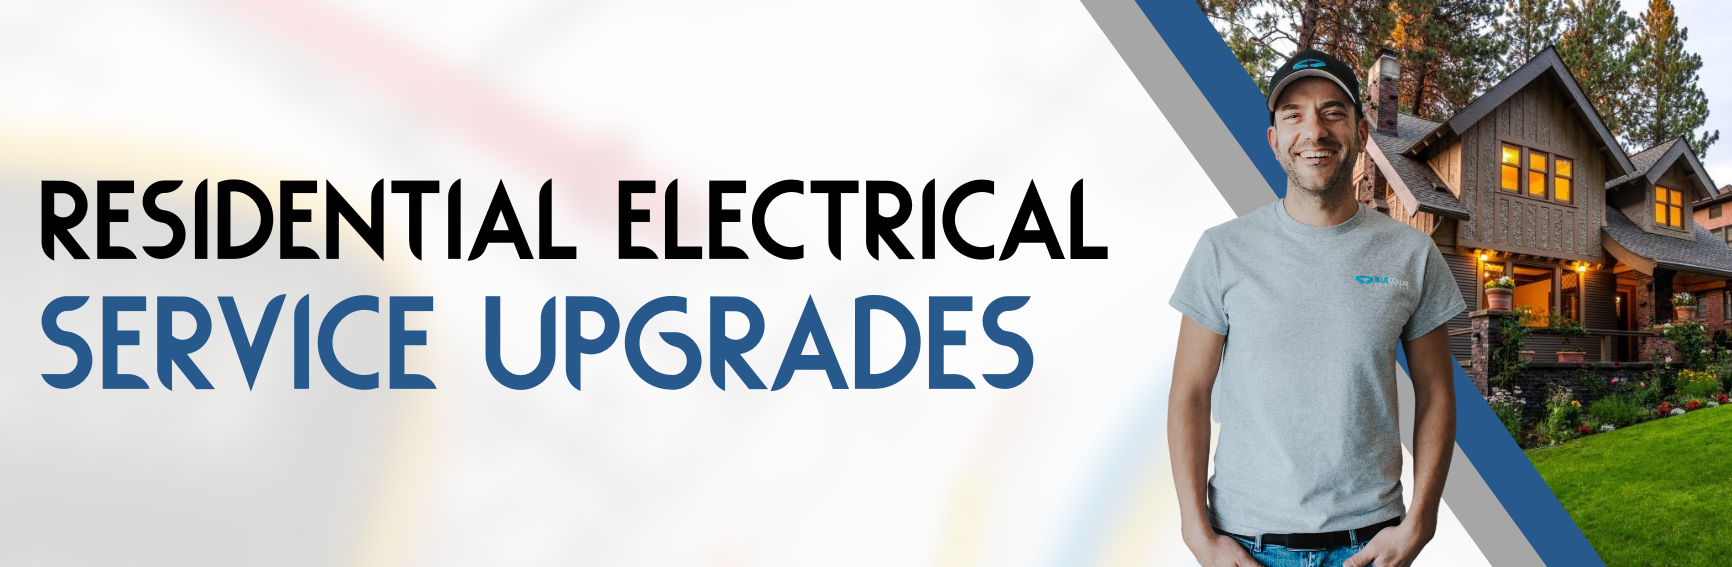 Residential Electrical Service Upgrades - Blue Collar Electric